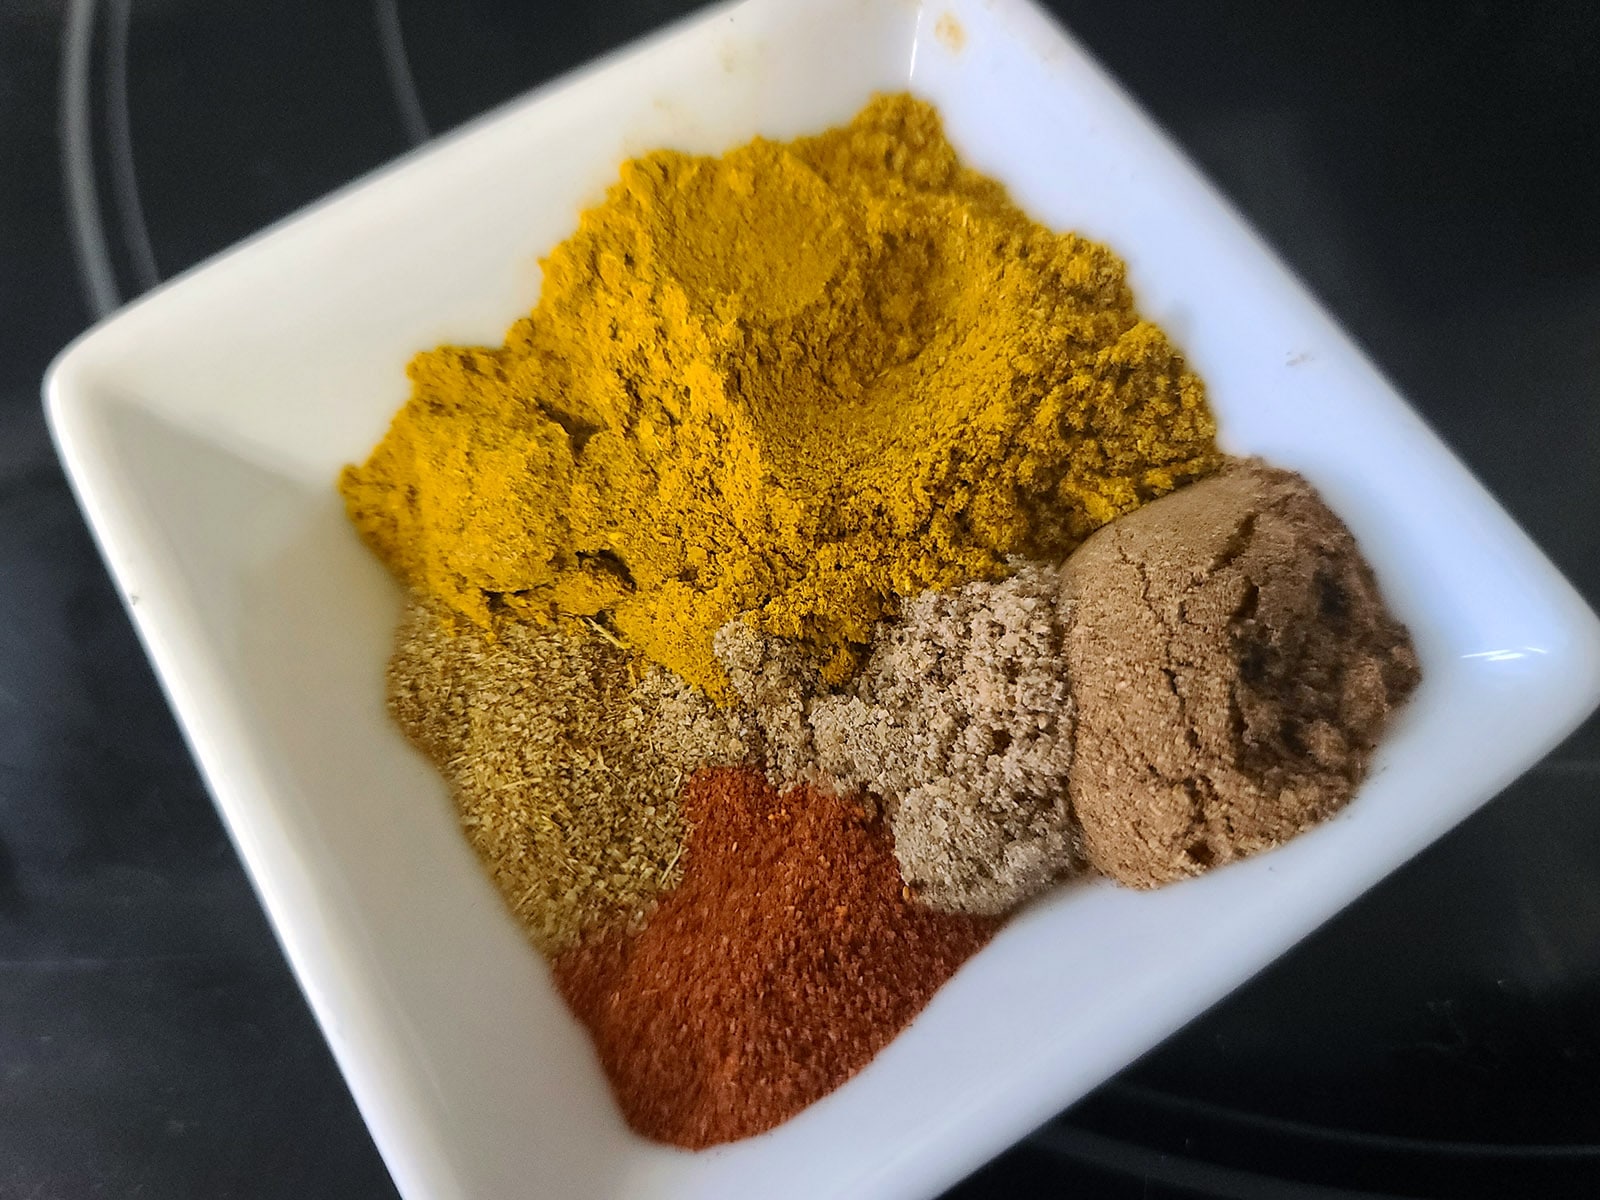 A bowrl of brightly coloured Indian spices.